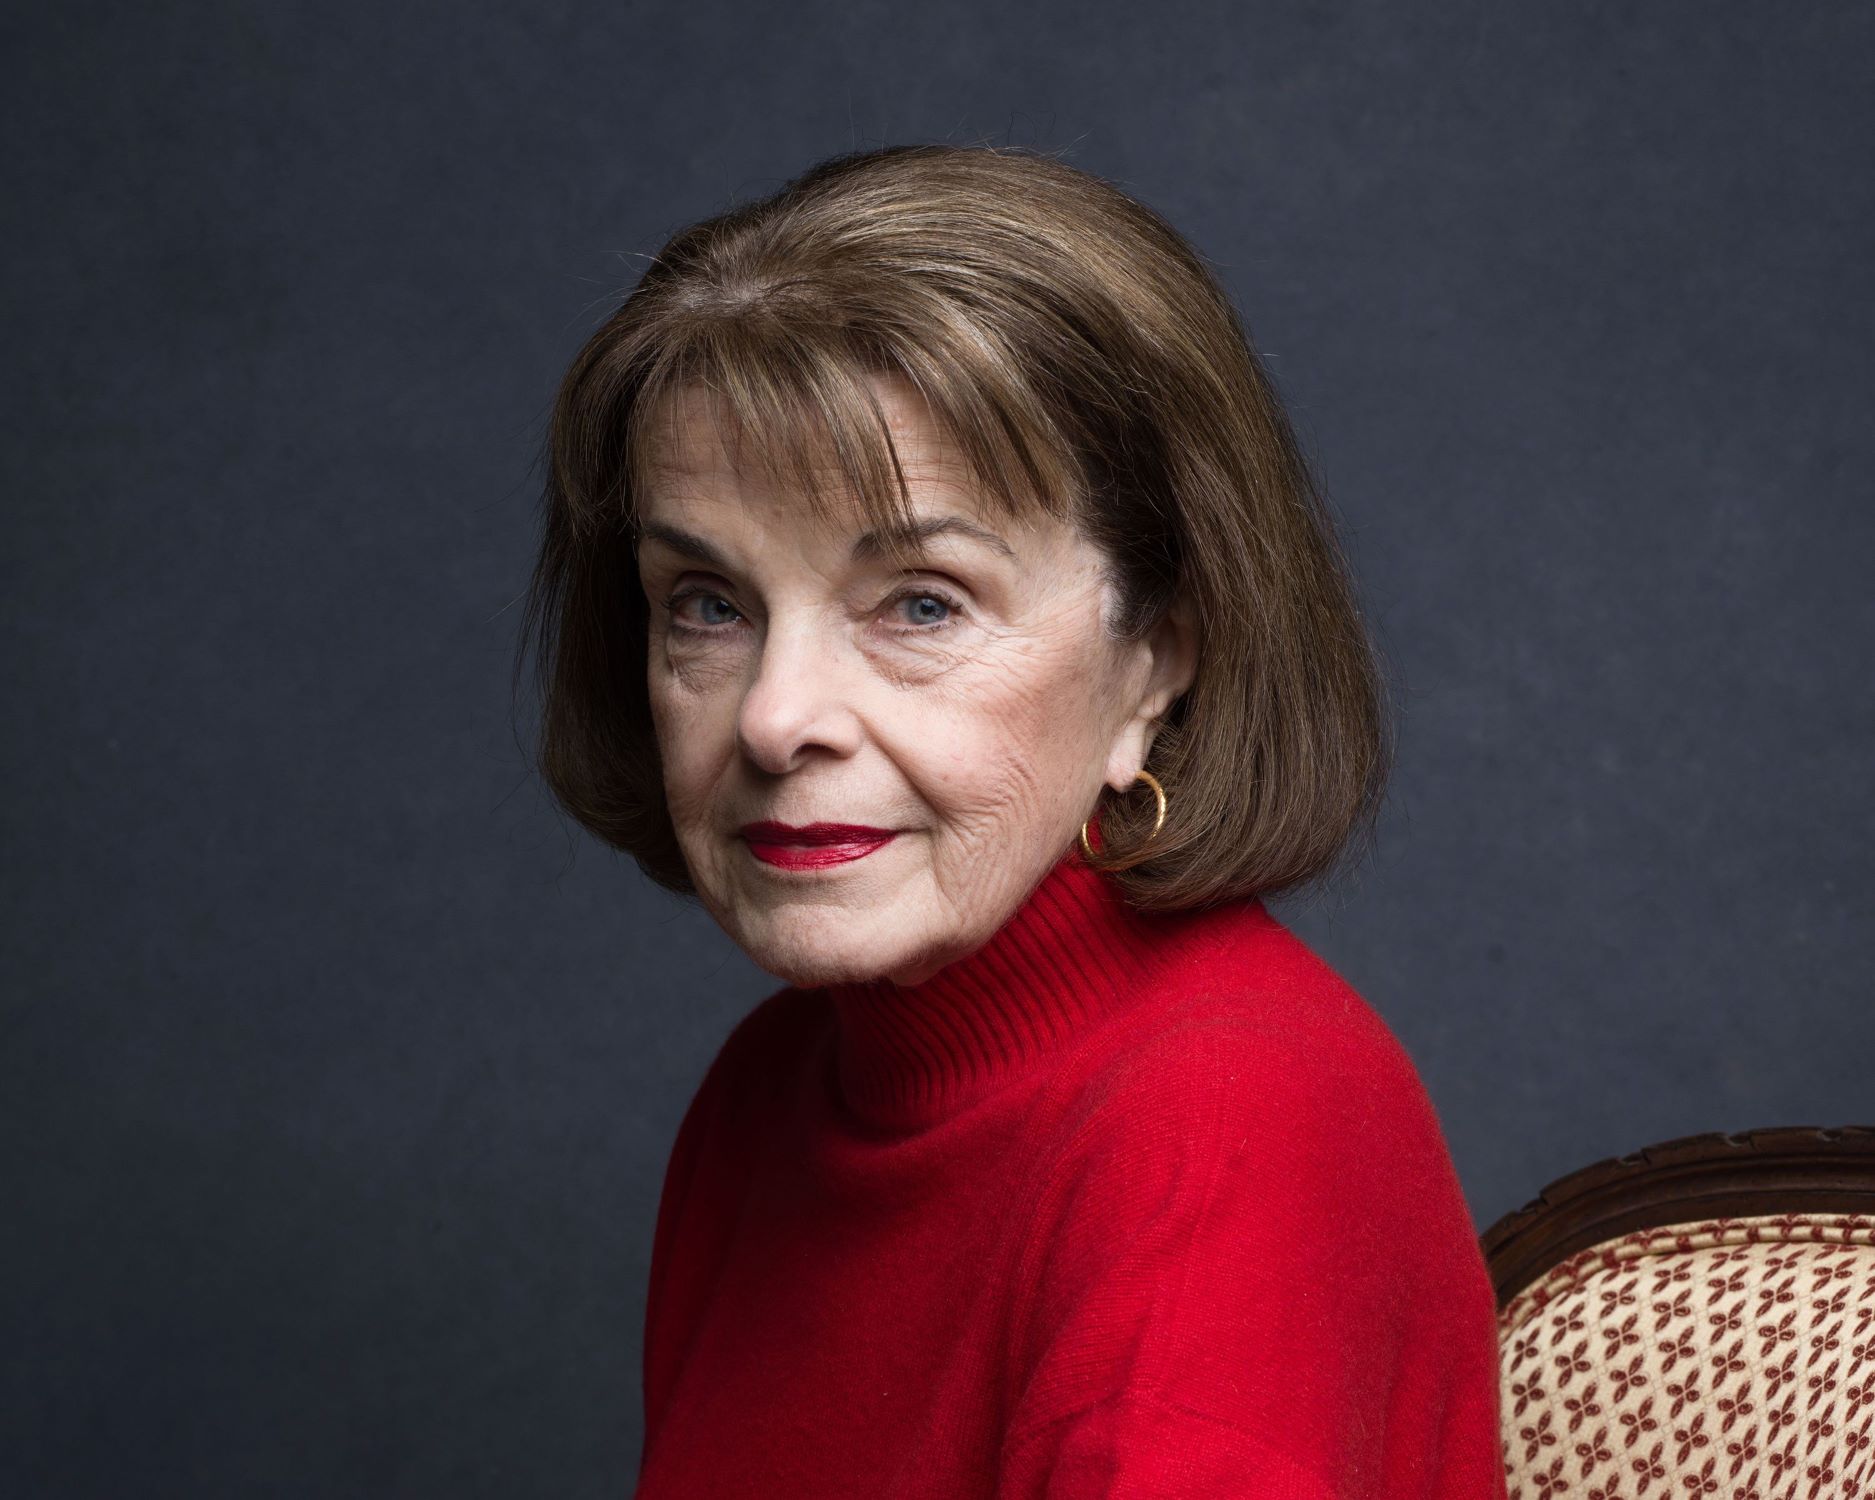 Dianne Feinstein Posed For Photo Hours Before Her Death